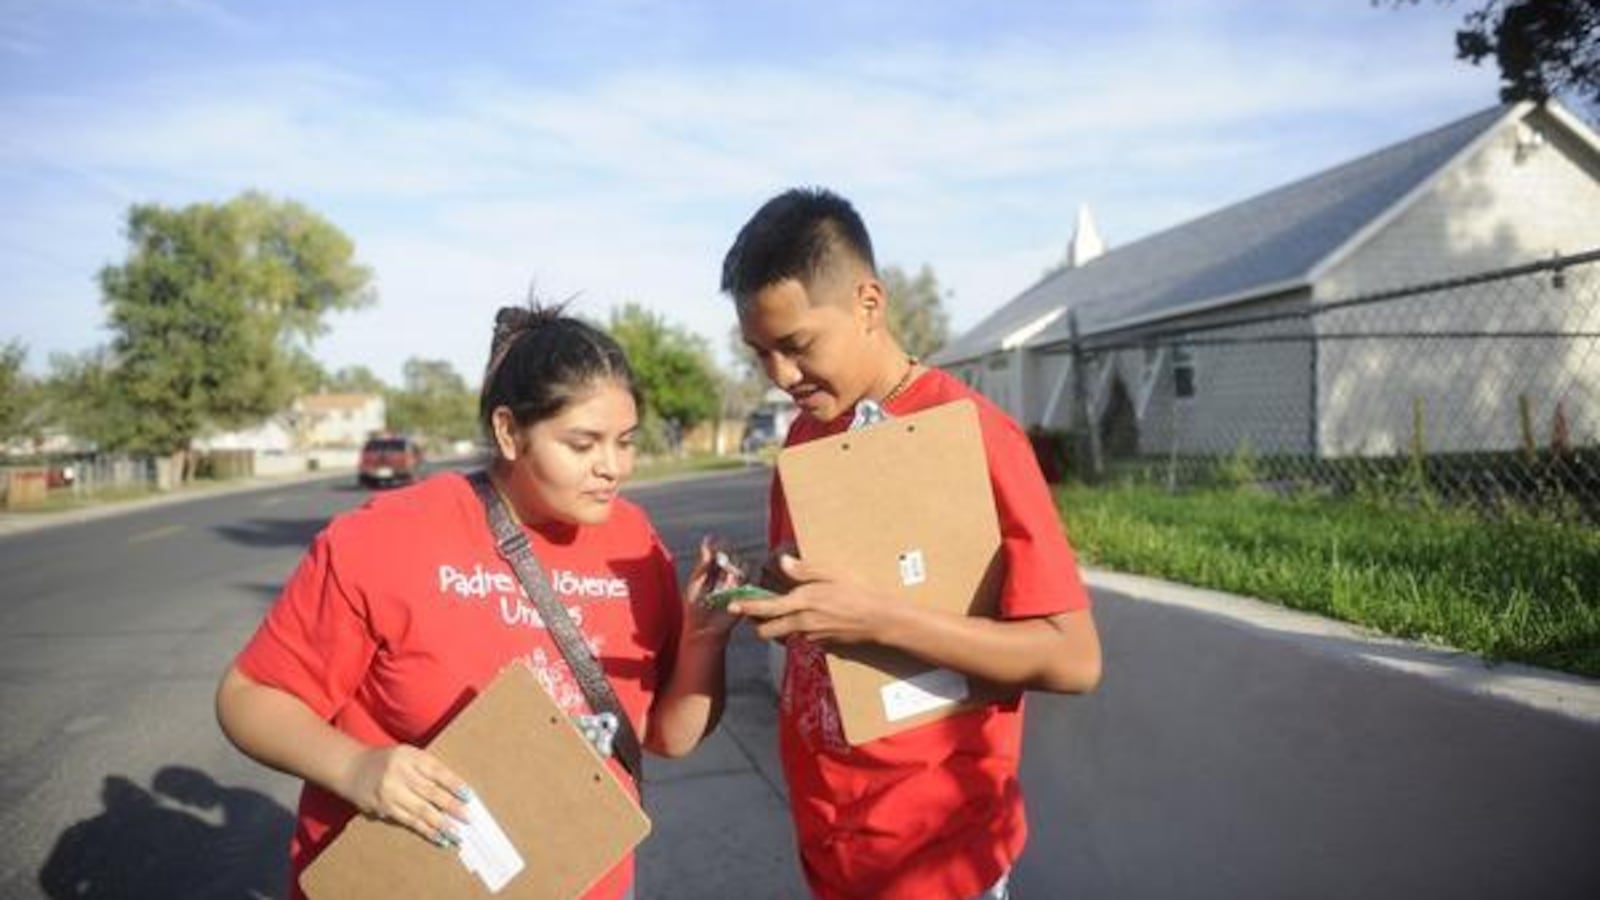 Valeria Cordova and Alex Duran with Padres & Jóvenes Unidos conduct a get-out-the-vote effort in 2013, encouraging voters to cast ballots but not advocating for a position.